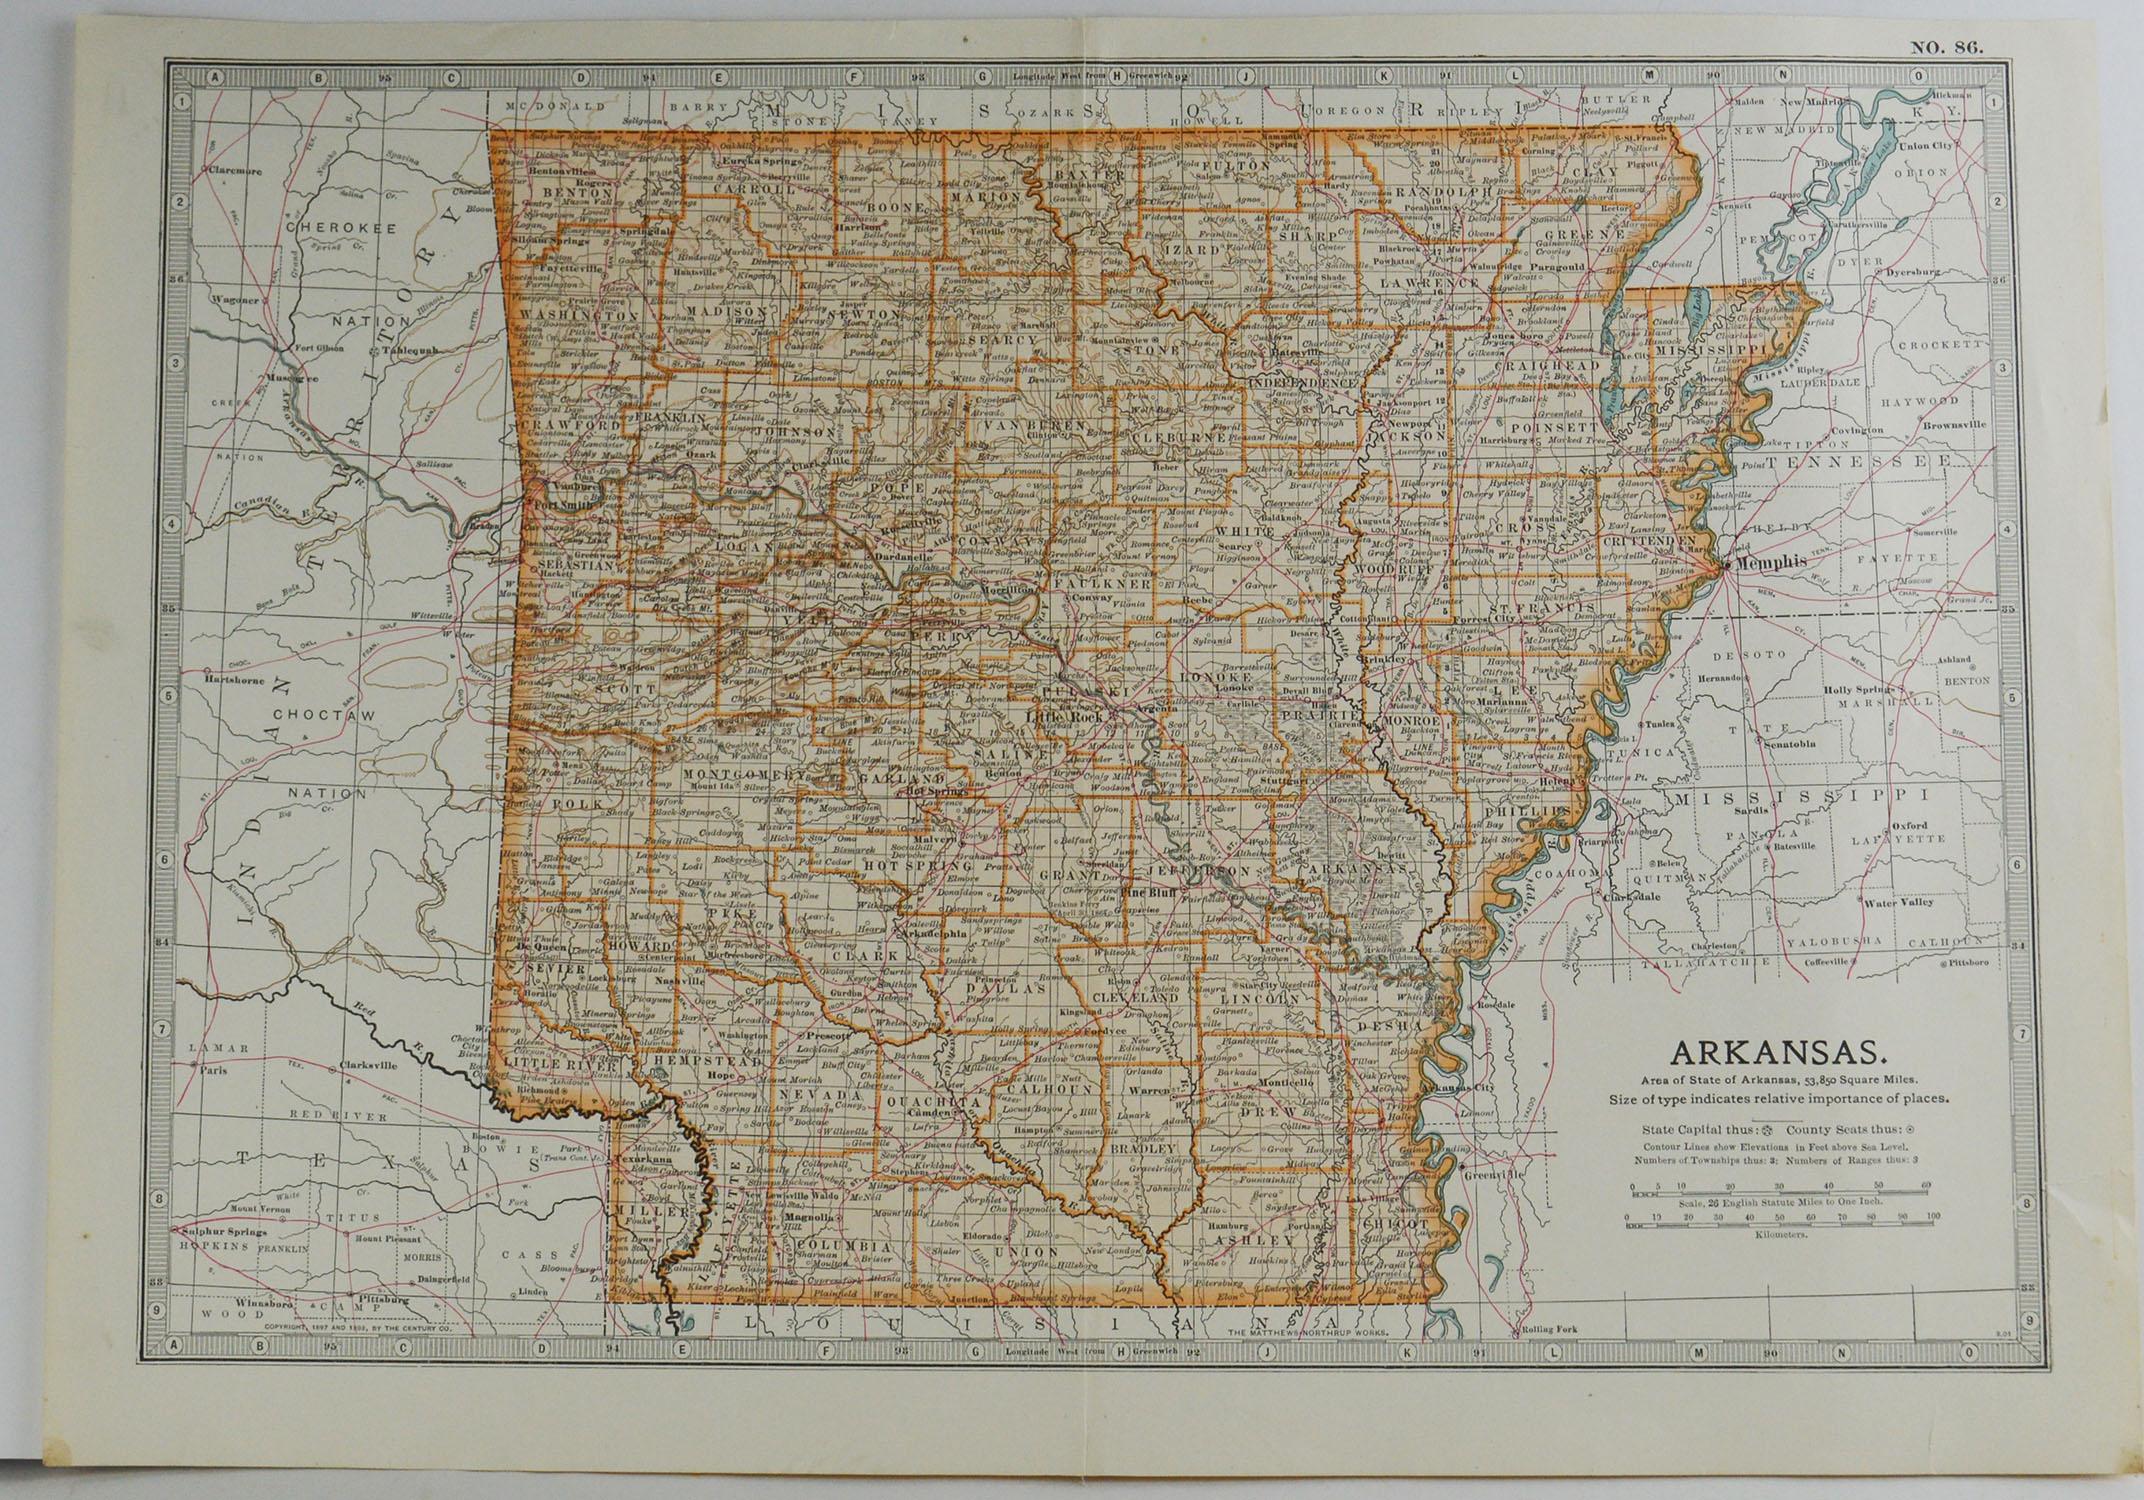 Great map of Arkansas

Original color.

Published, circa 1890

Repairs to minor edge tears

Unframed.
      